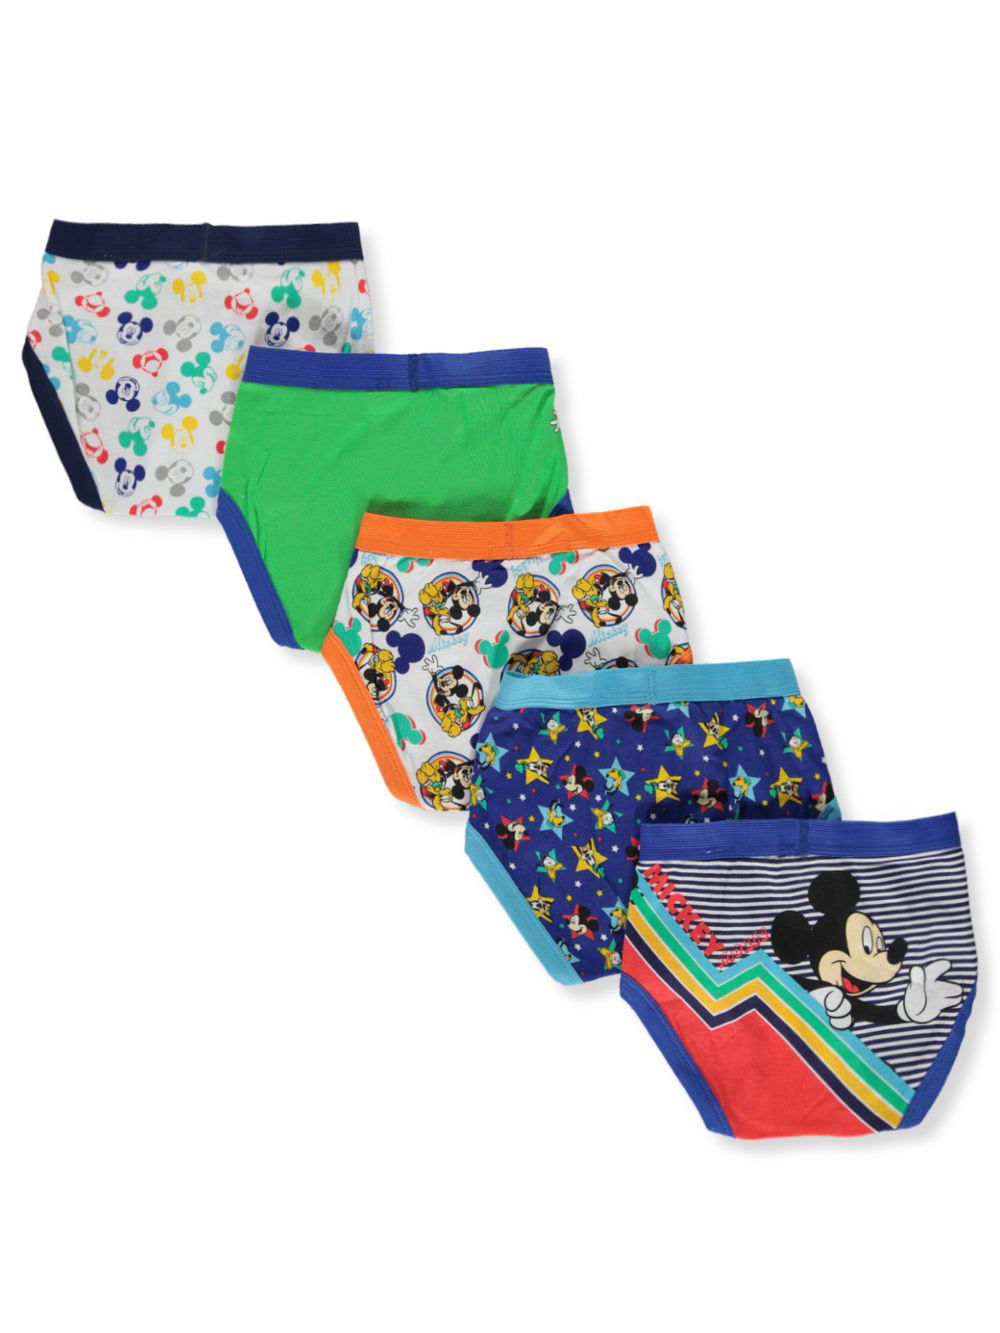 Disney Mickey Mouse Boys' 5-Pack Briefs - white/multi, 4t (Toddler) 